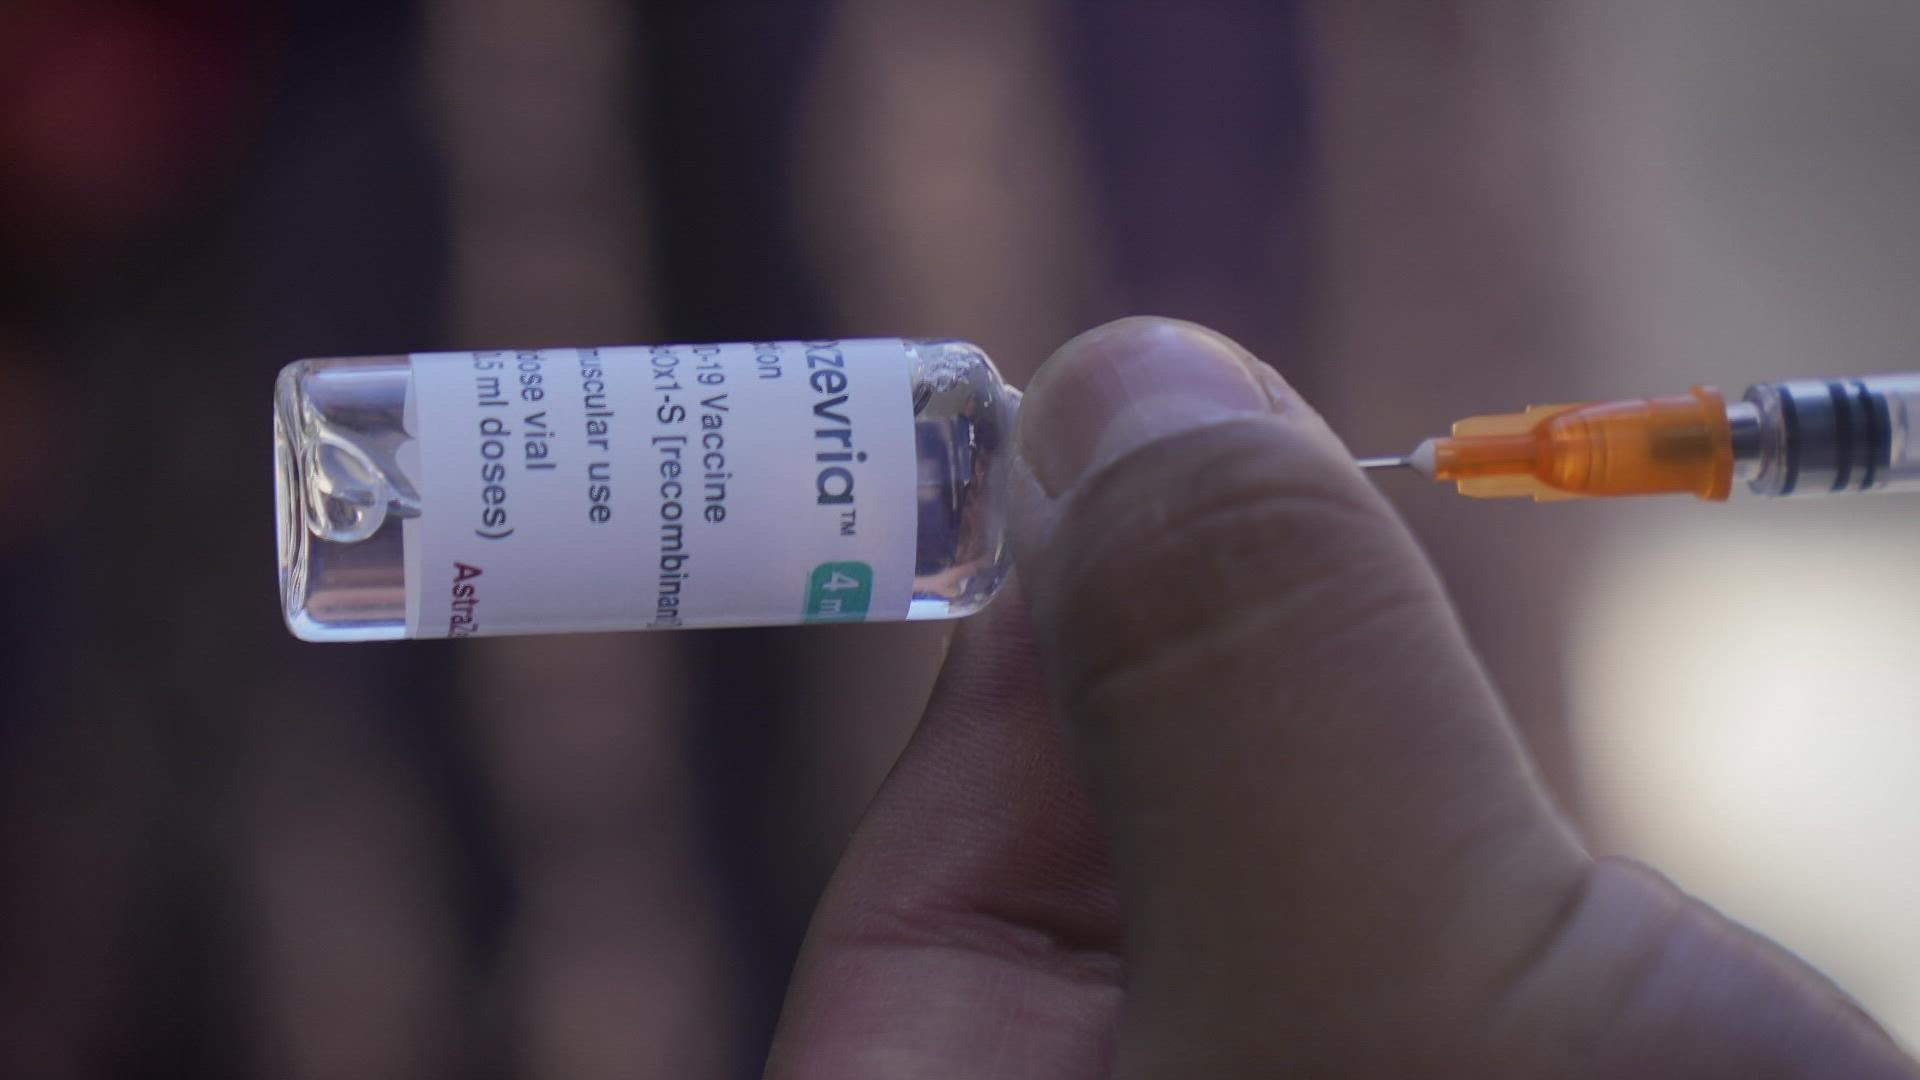 Washington state was allotted 796 doses of the two-dose JYNNEOS vaccine.